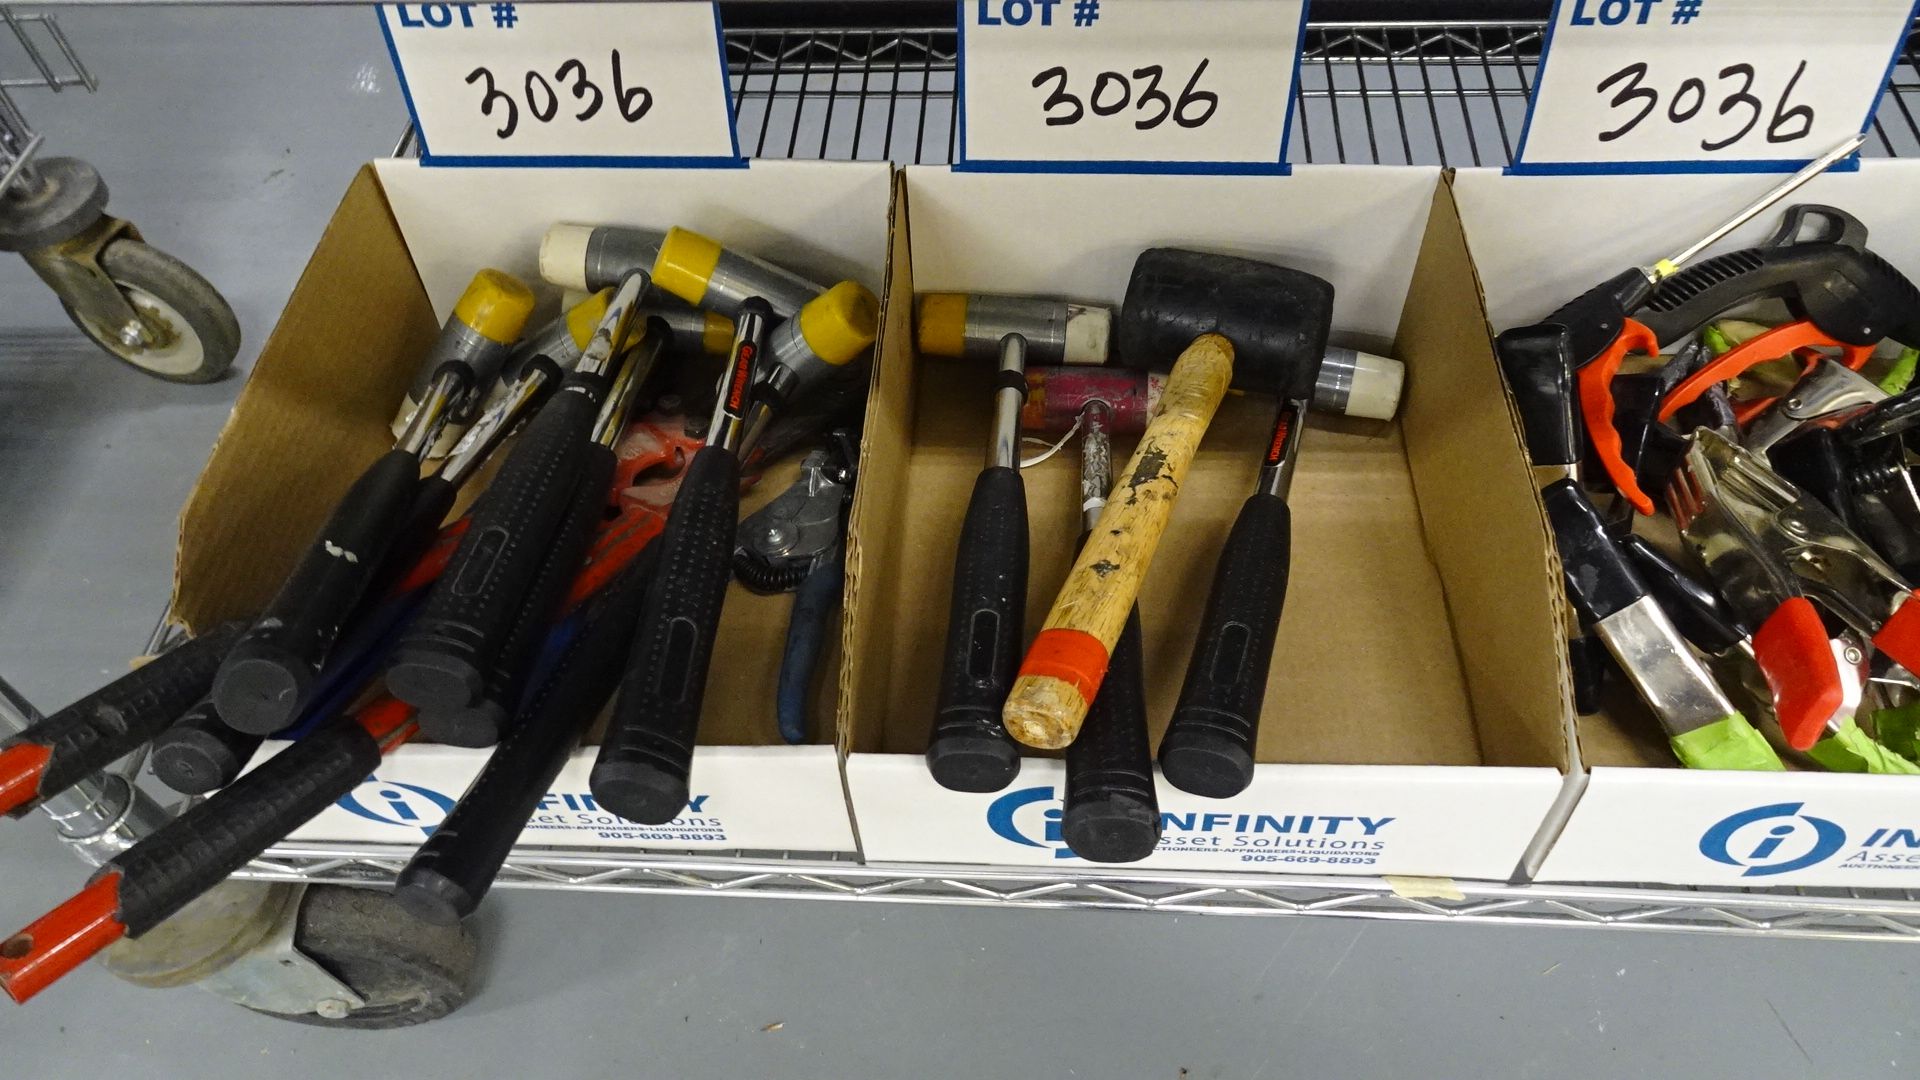 LOT ASST. HAND TOOLS (5 BOXES) (REUTER) - Image 2 of 3